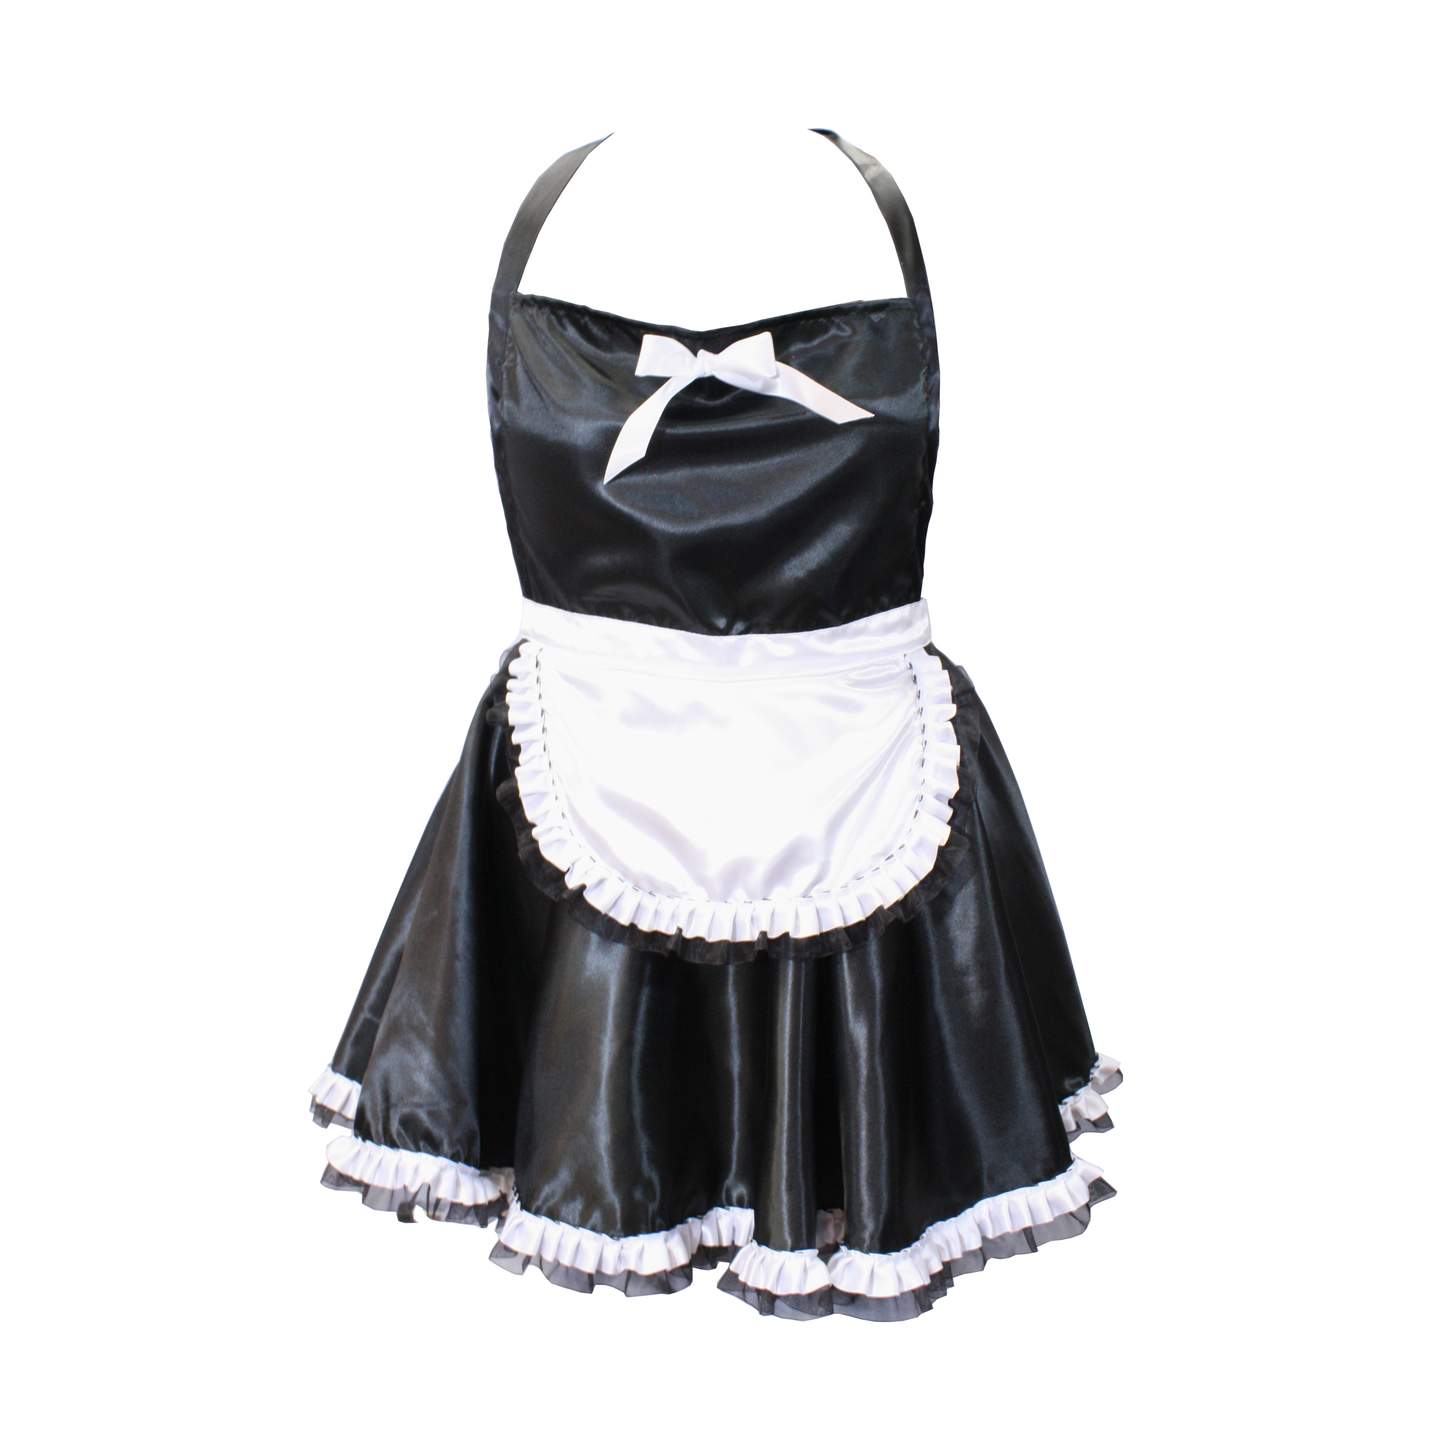 Plus Size French Maid Outfit by Tipsy Totes